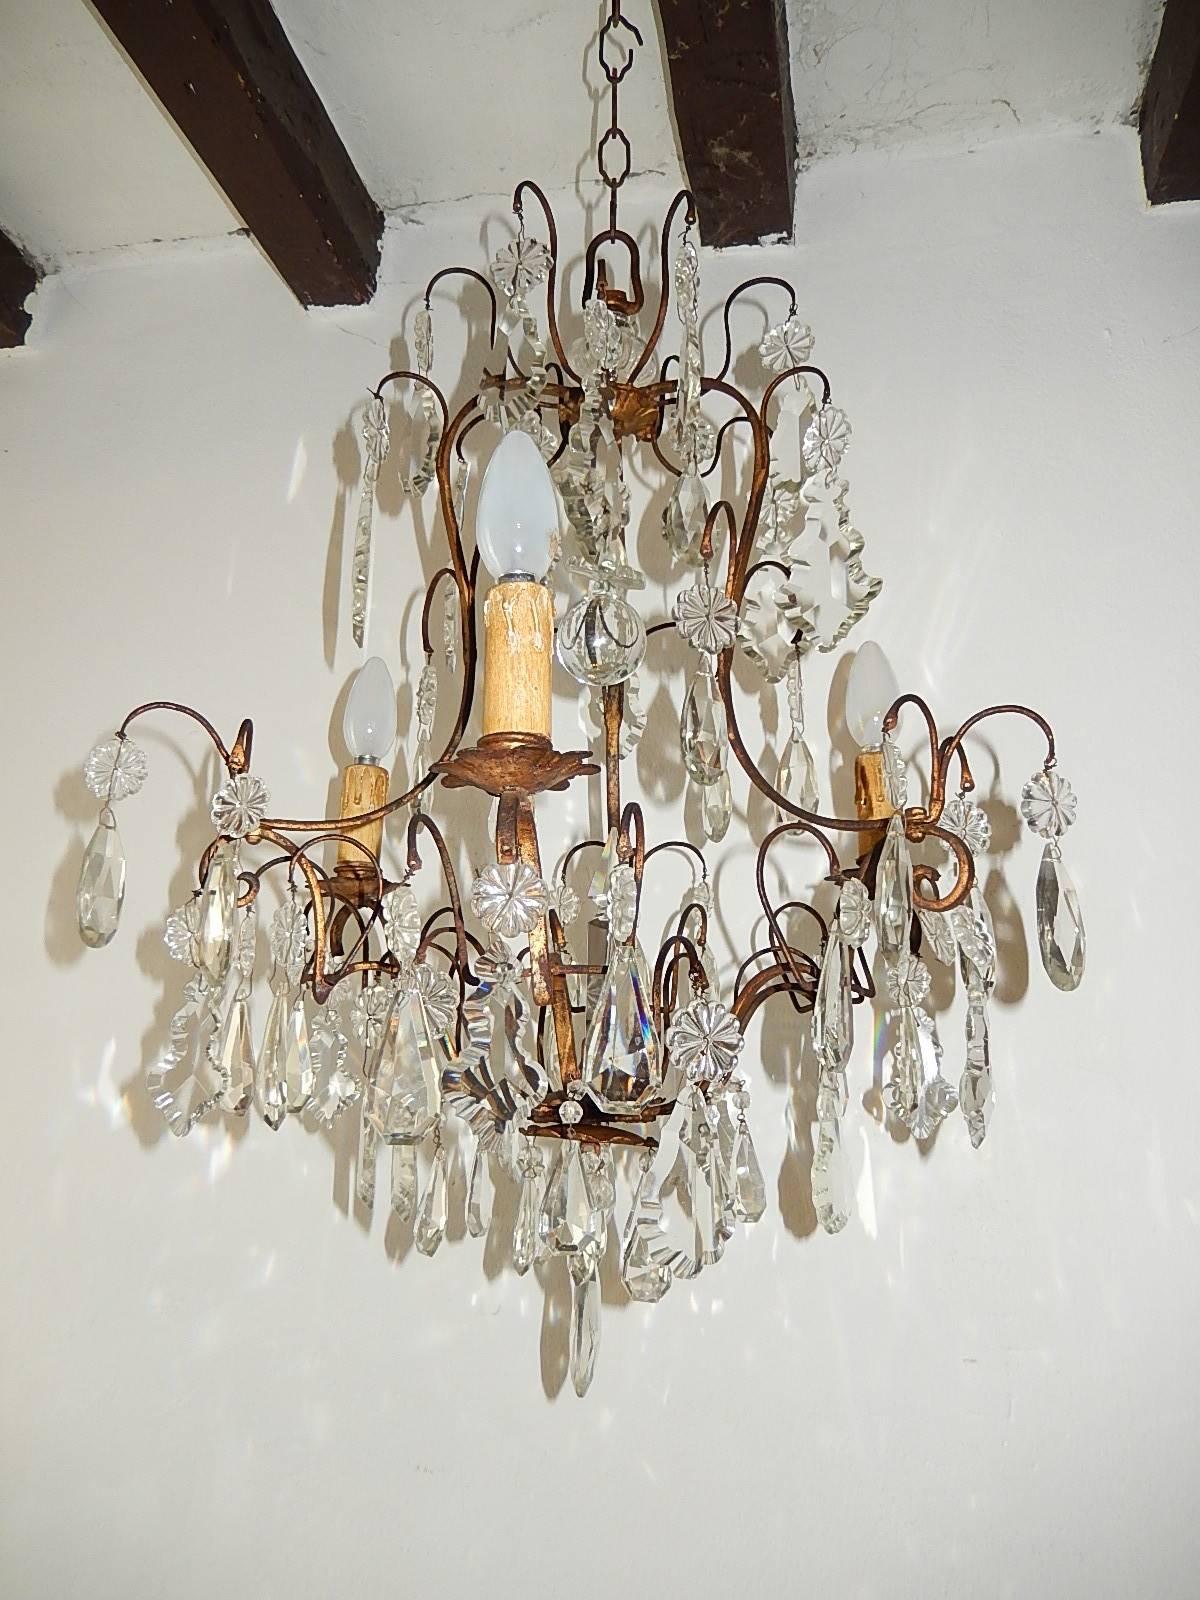 Housing three lights. Re-wired and ready to hang. Gilt metal with florets and crystal prisms. Crystal spear and ball in centre. Murano glass on top. Free priority shipping from Italy.